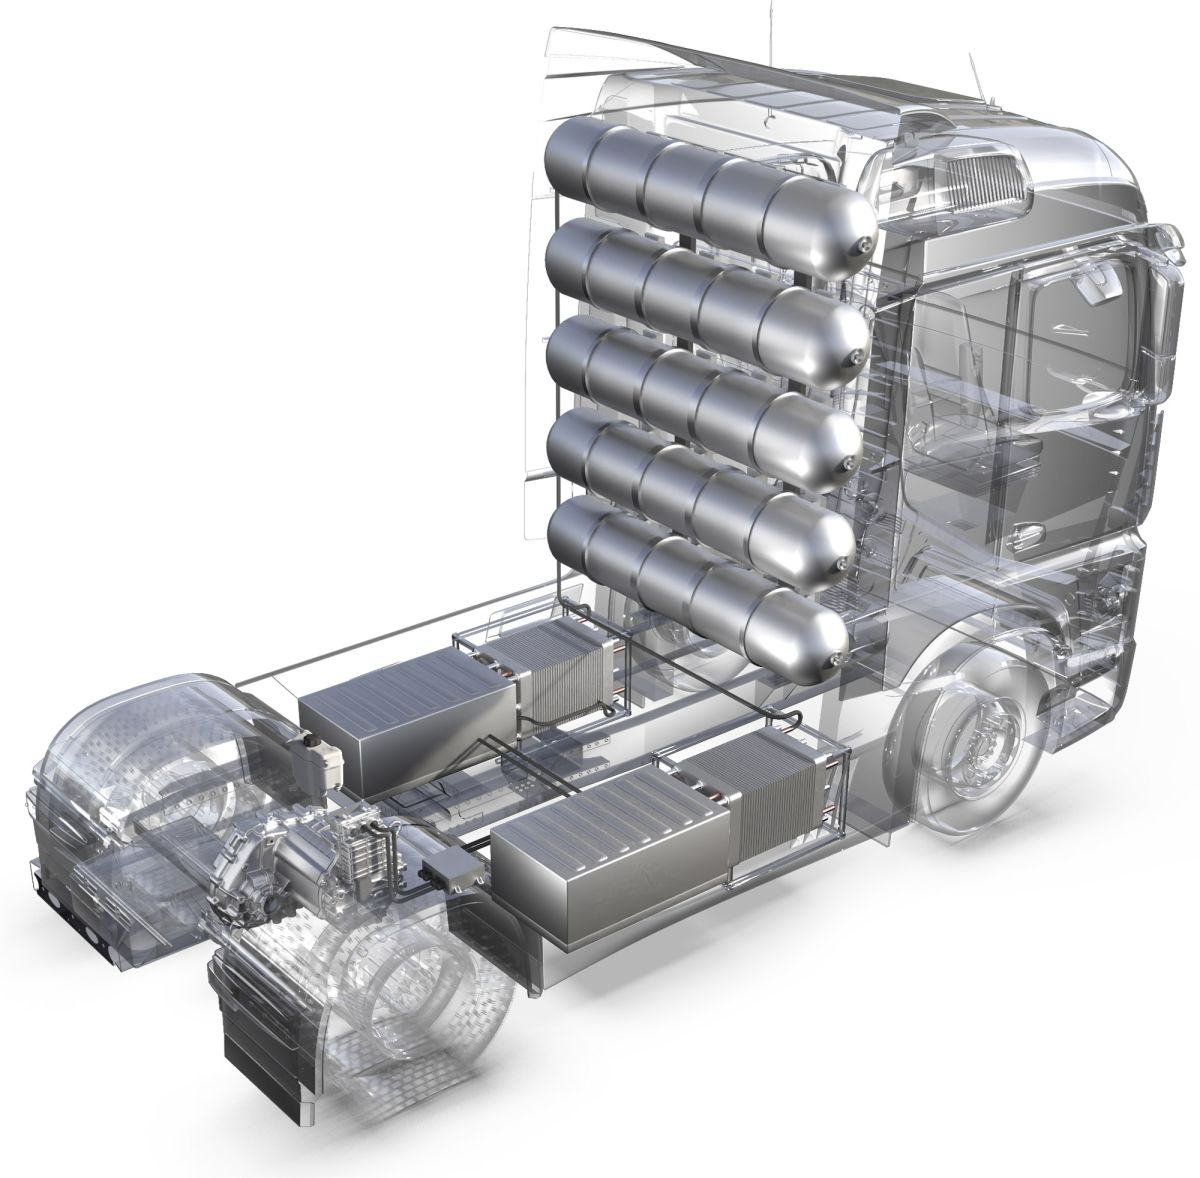 Introduction of the BiFoilStack solution for heavy duty fuel cell systems